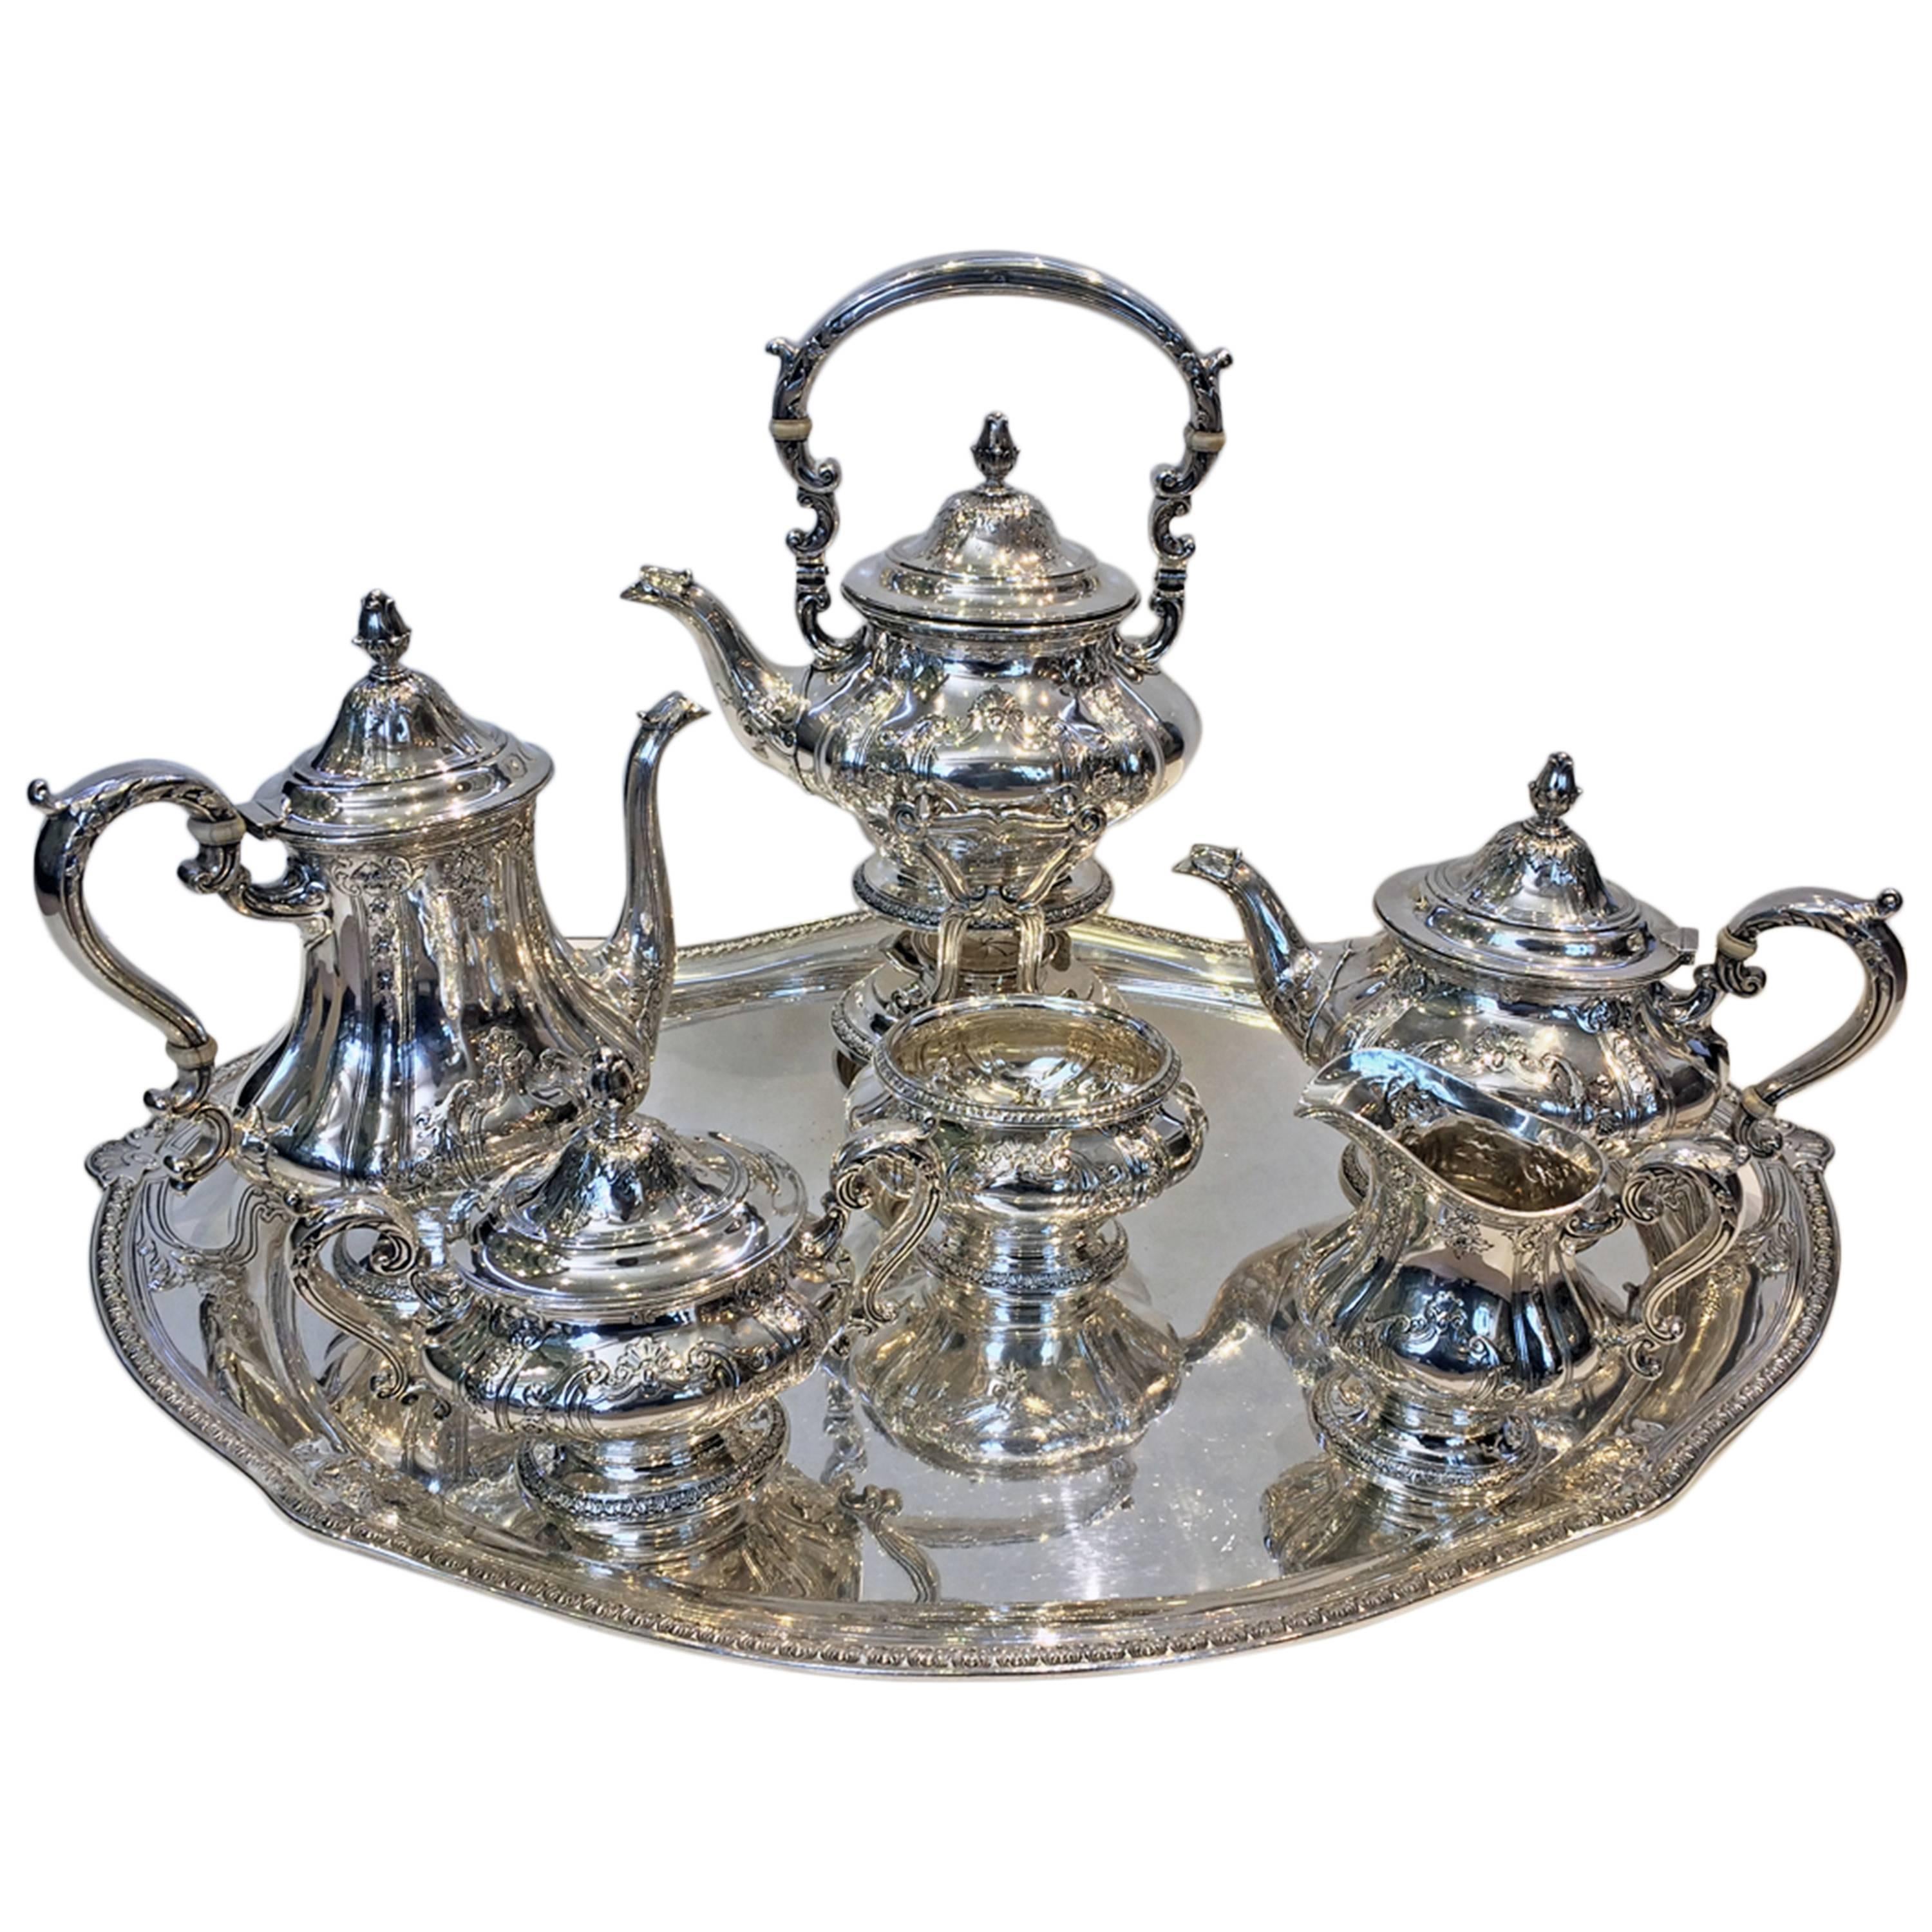 Seven-Piece Gorham Sterling Silver Tea and Coffee Service and Tray, 1926